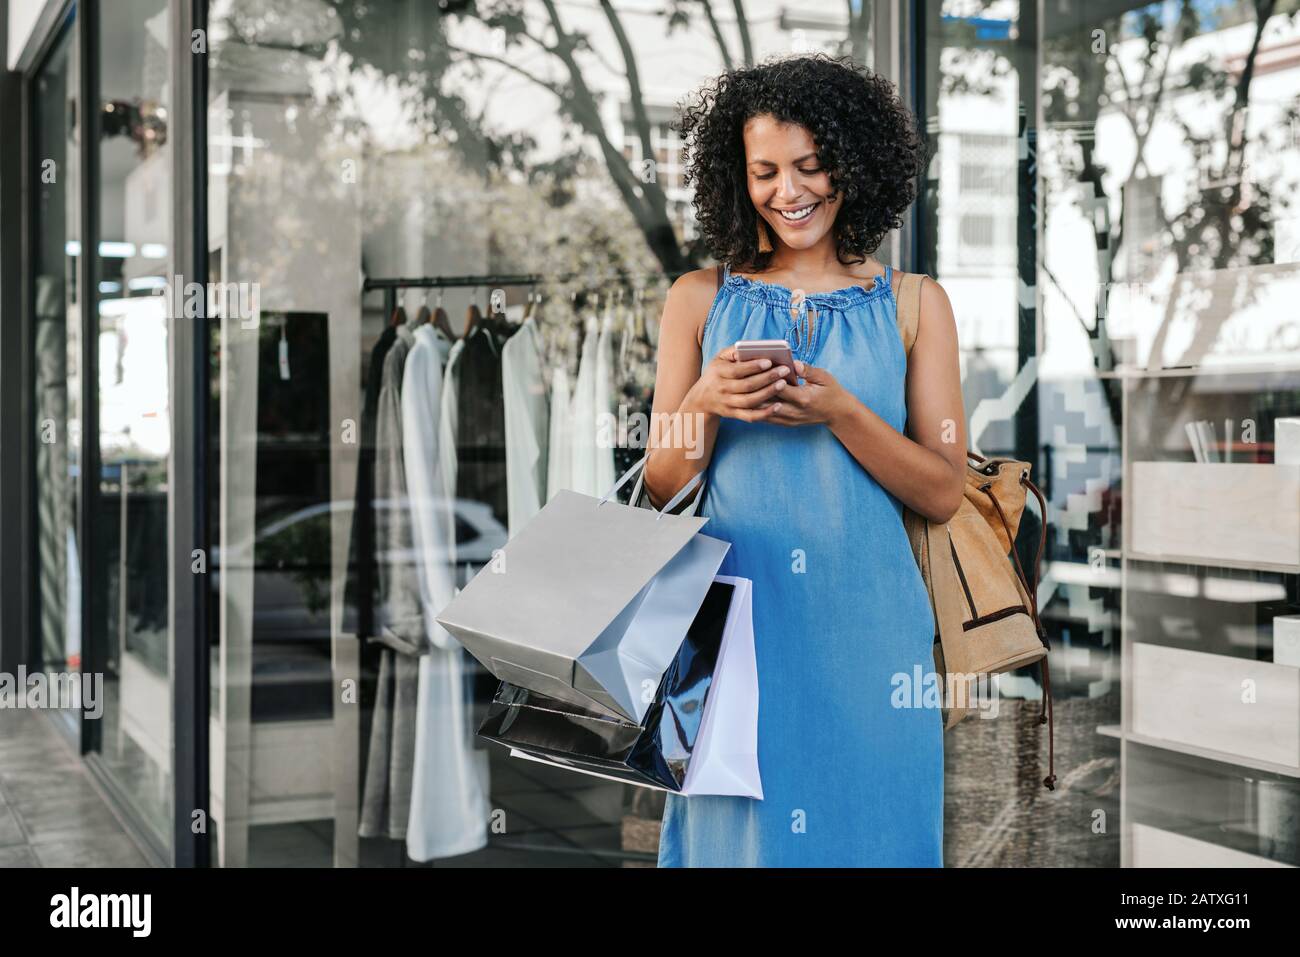 Smiling young woman reading a text while out clothes shopping Stock Photo